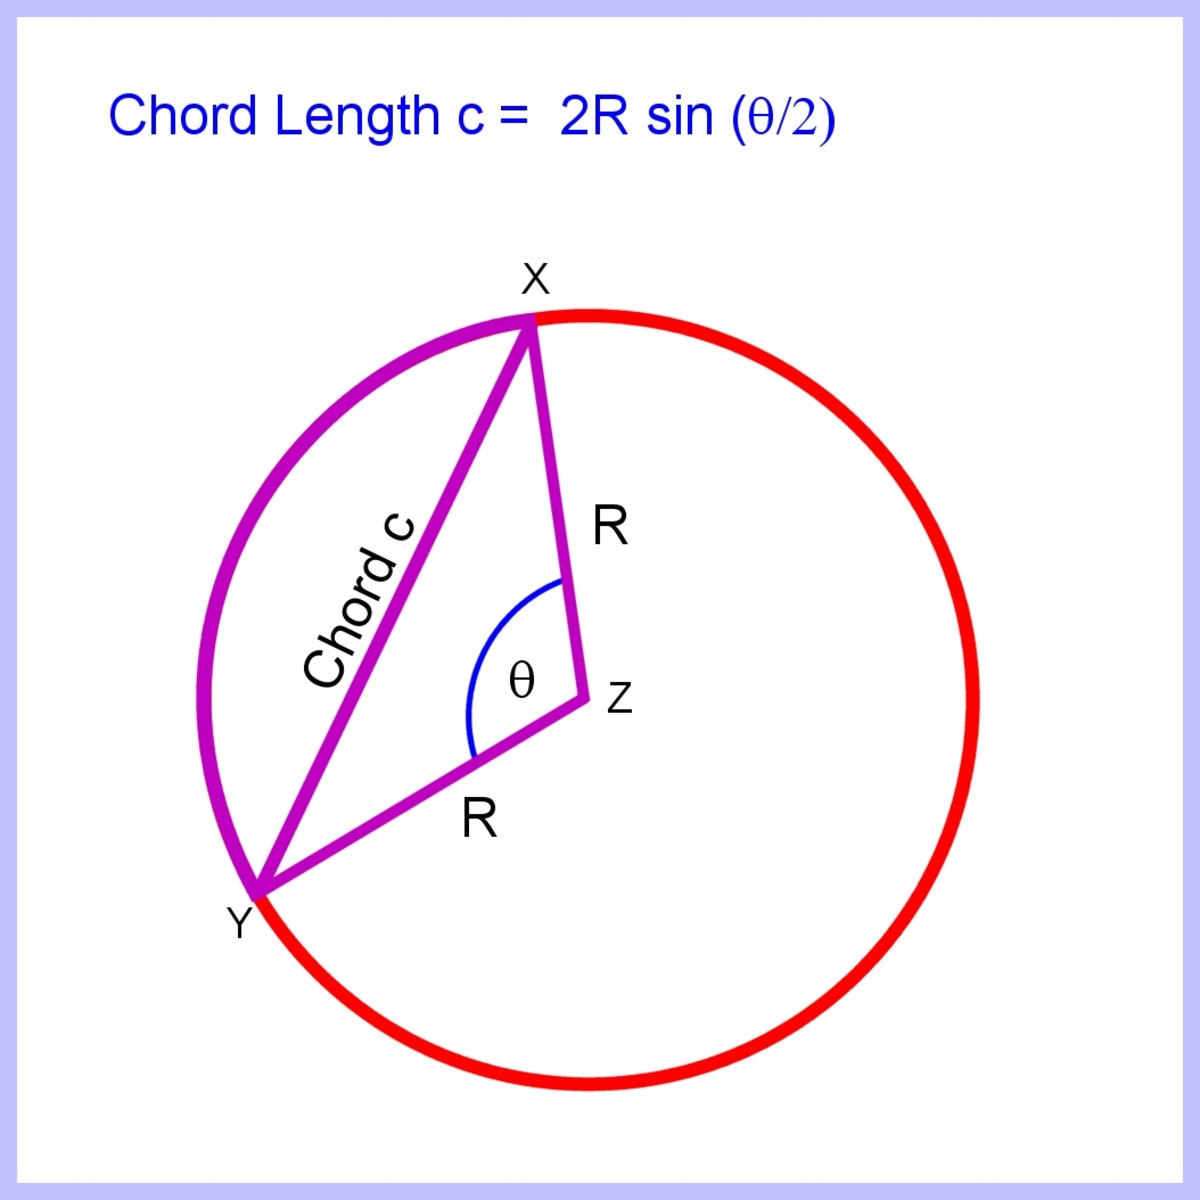 The length of a chord